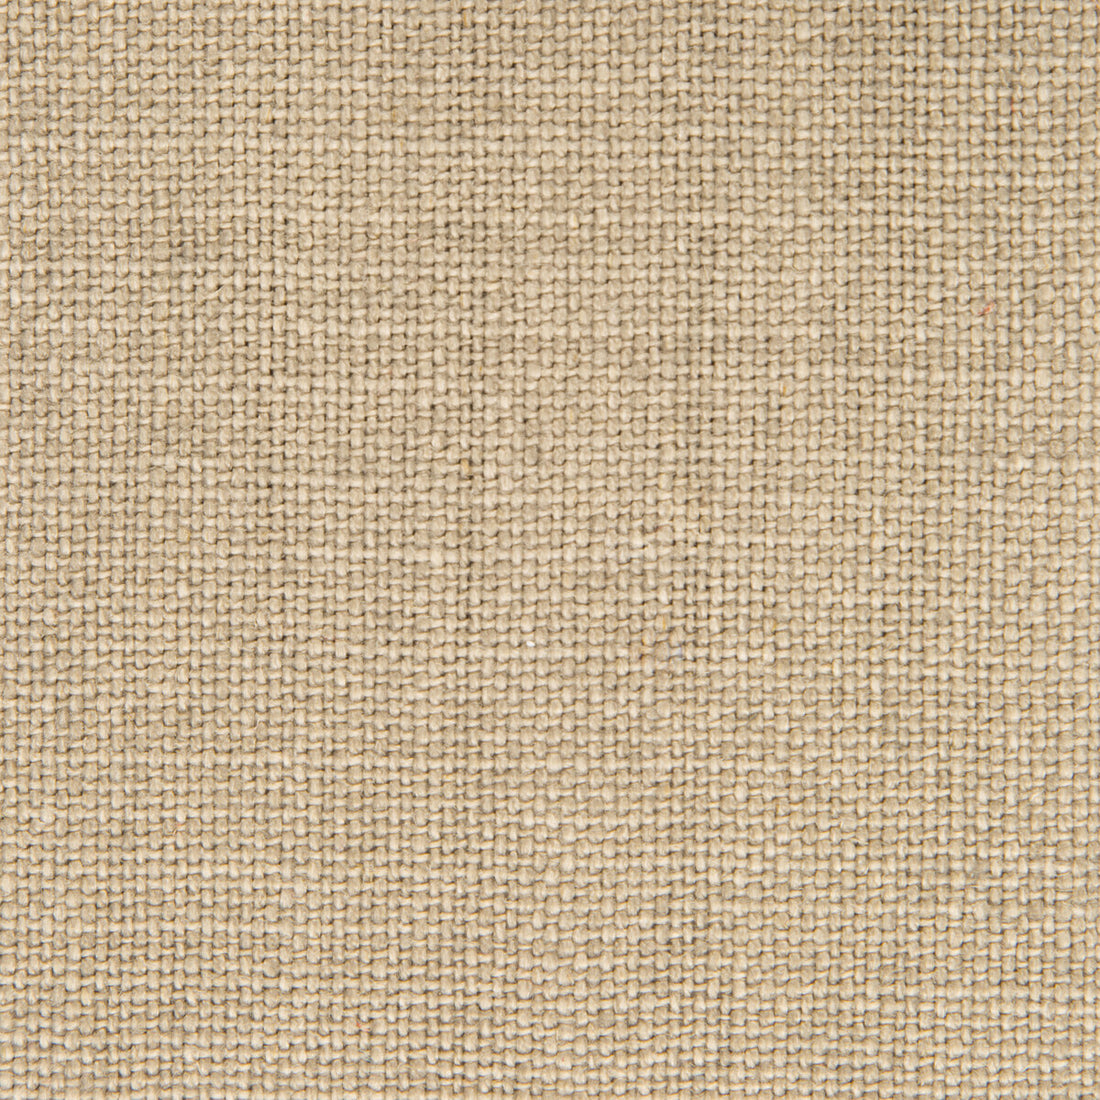 Nicaragua fabric in vison color - pattern GDT5239.002.0 - by Gaston y Daniela in the Basics collection